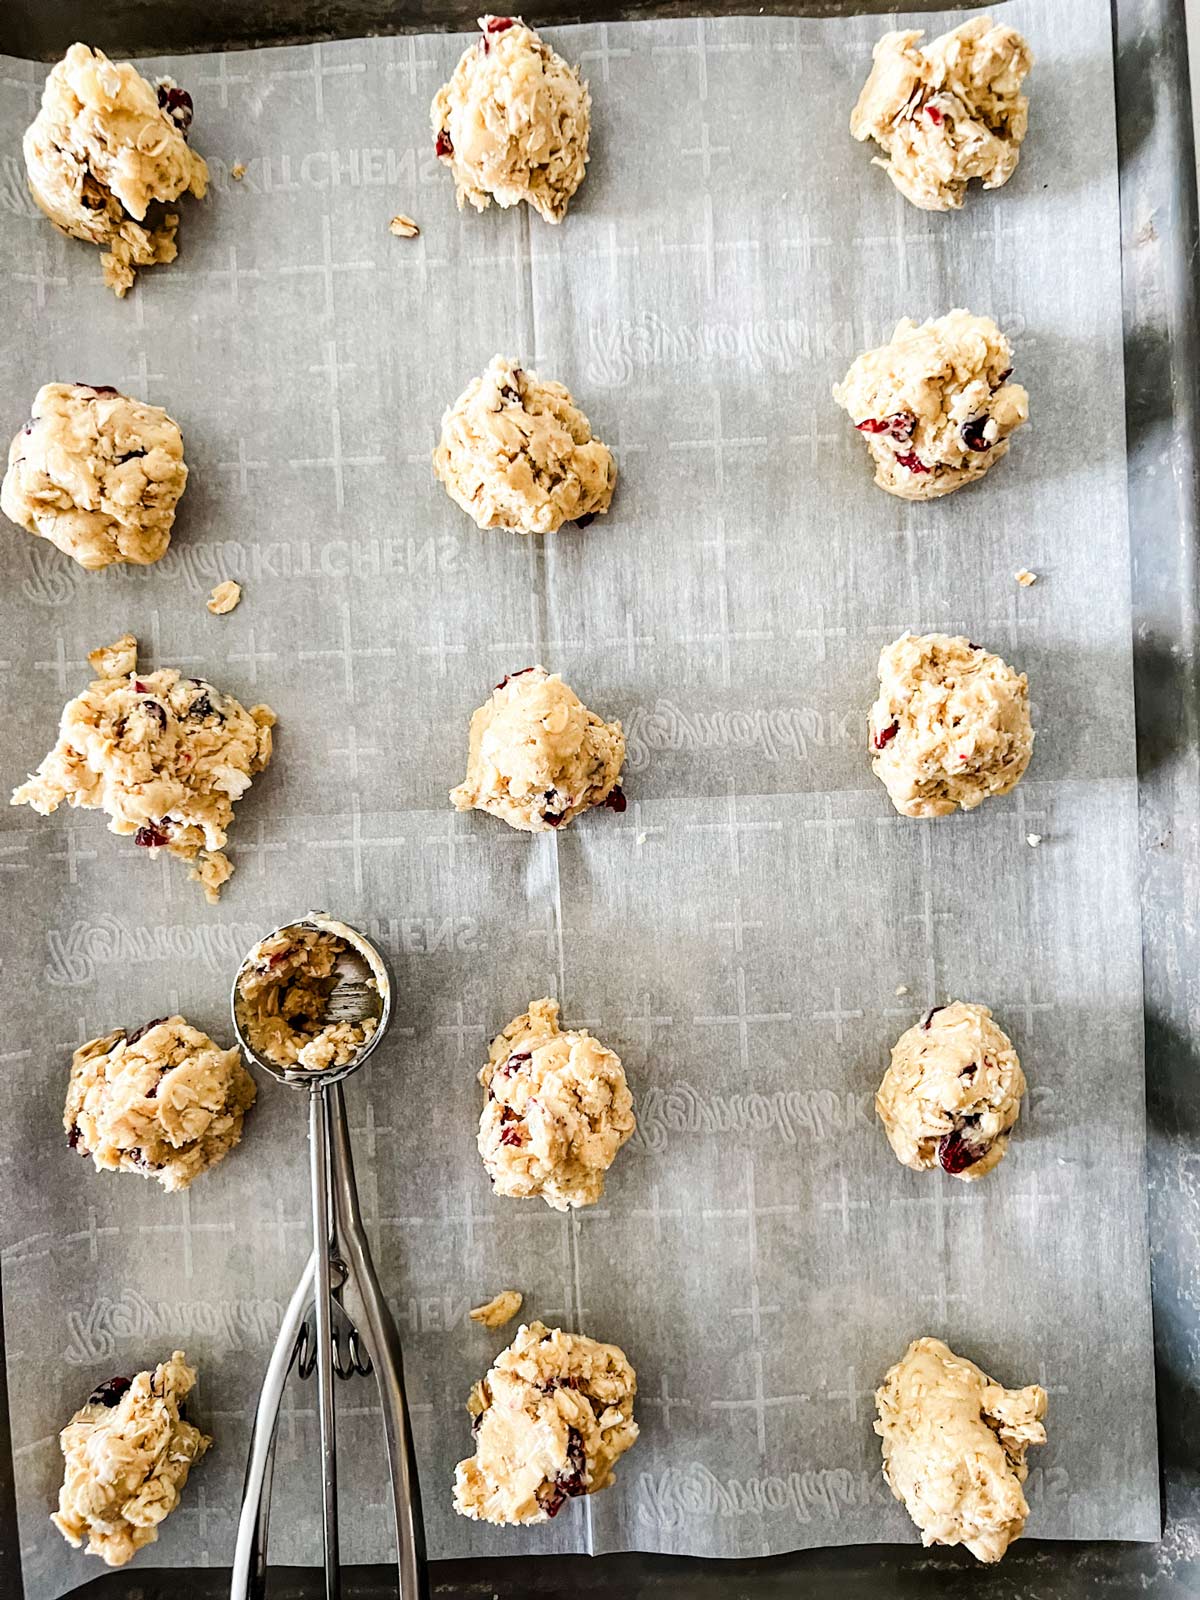 A cookie scoop on a parchment lined baking sheet with scooped out cookies.